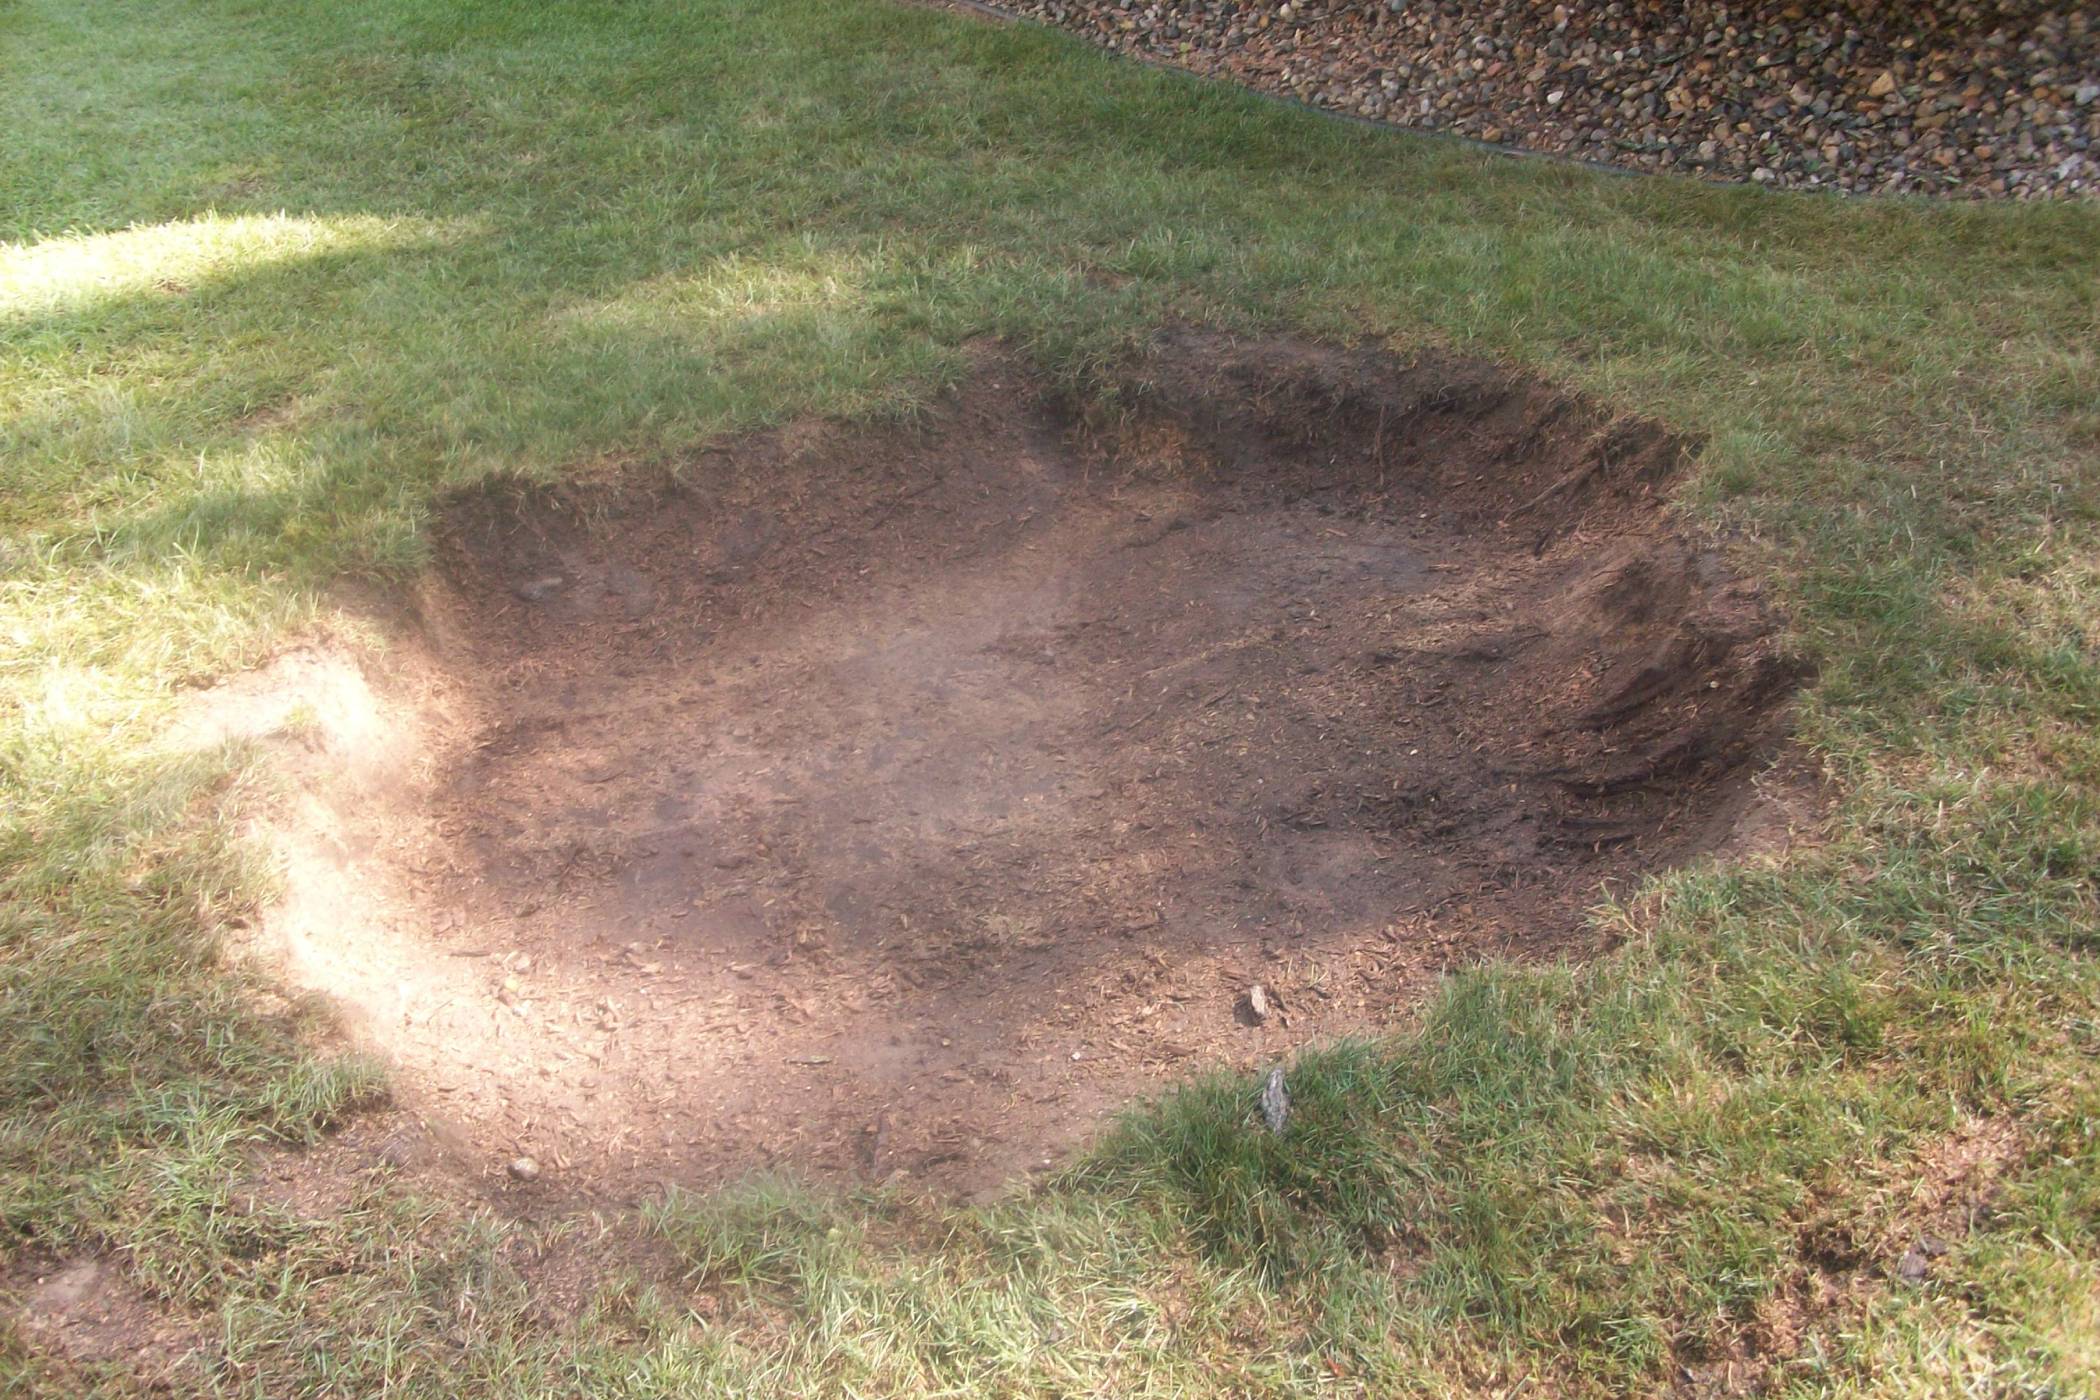 Shallow hole in the ground after tree stump removal has been completed.